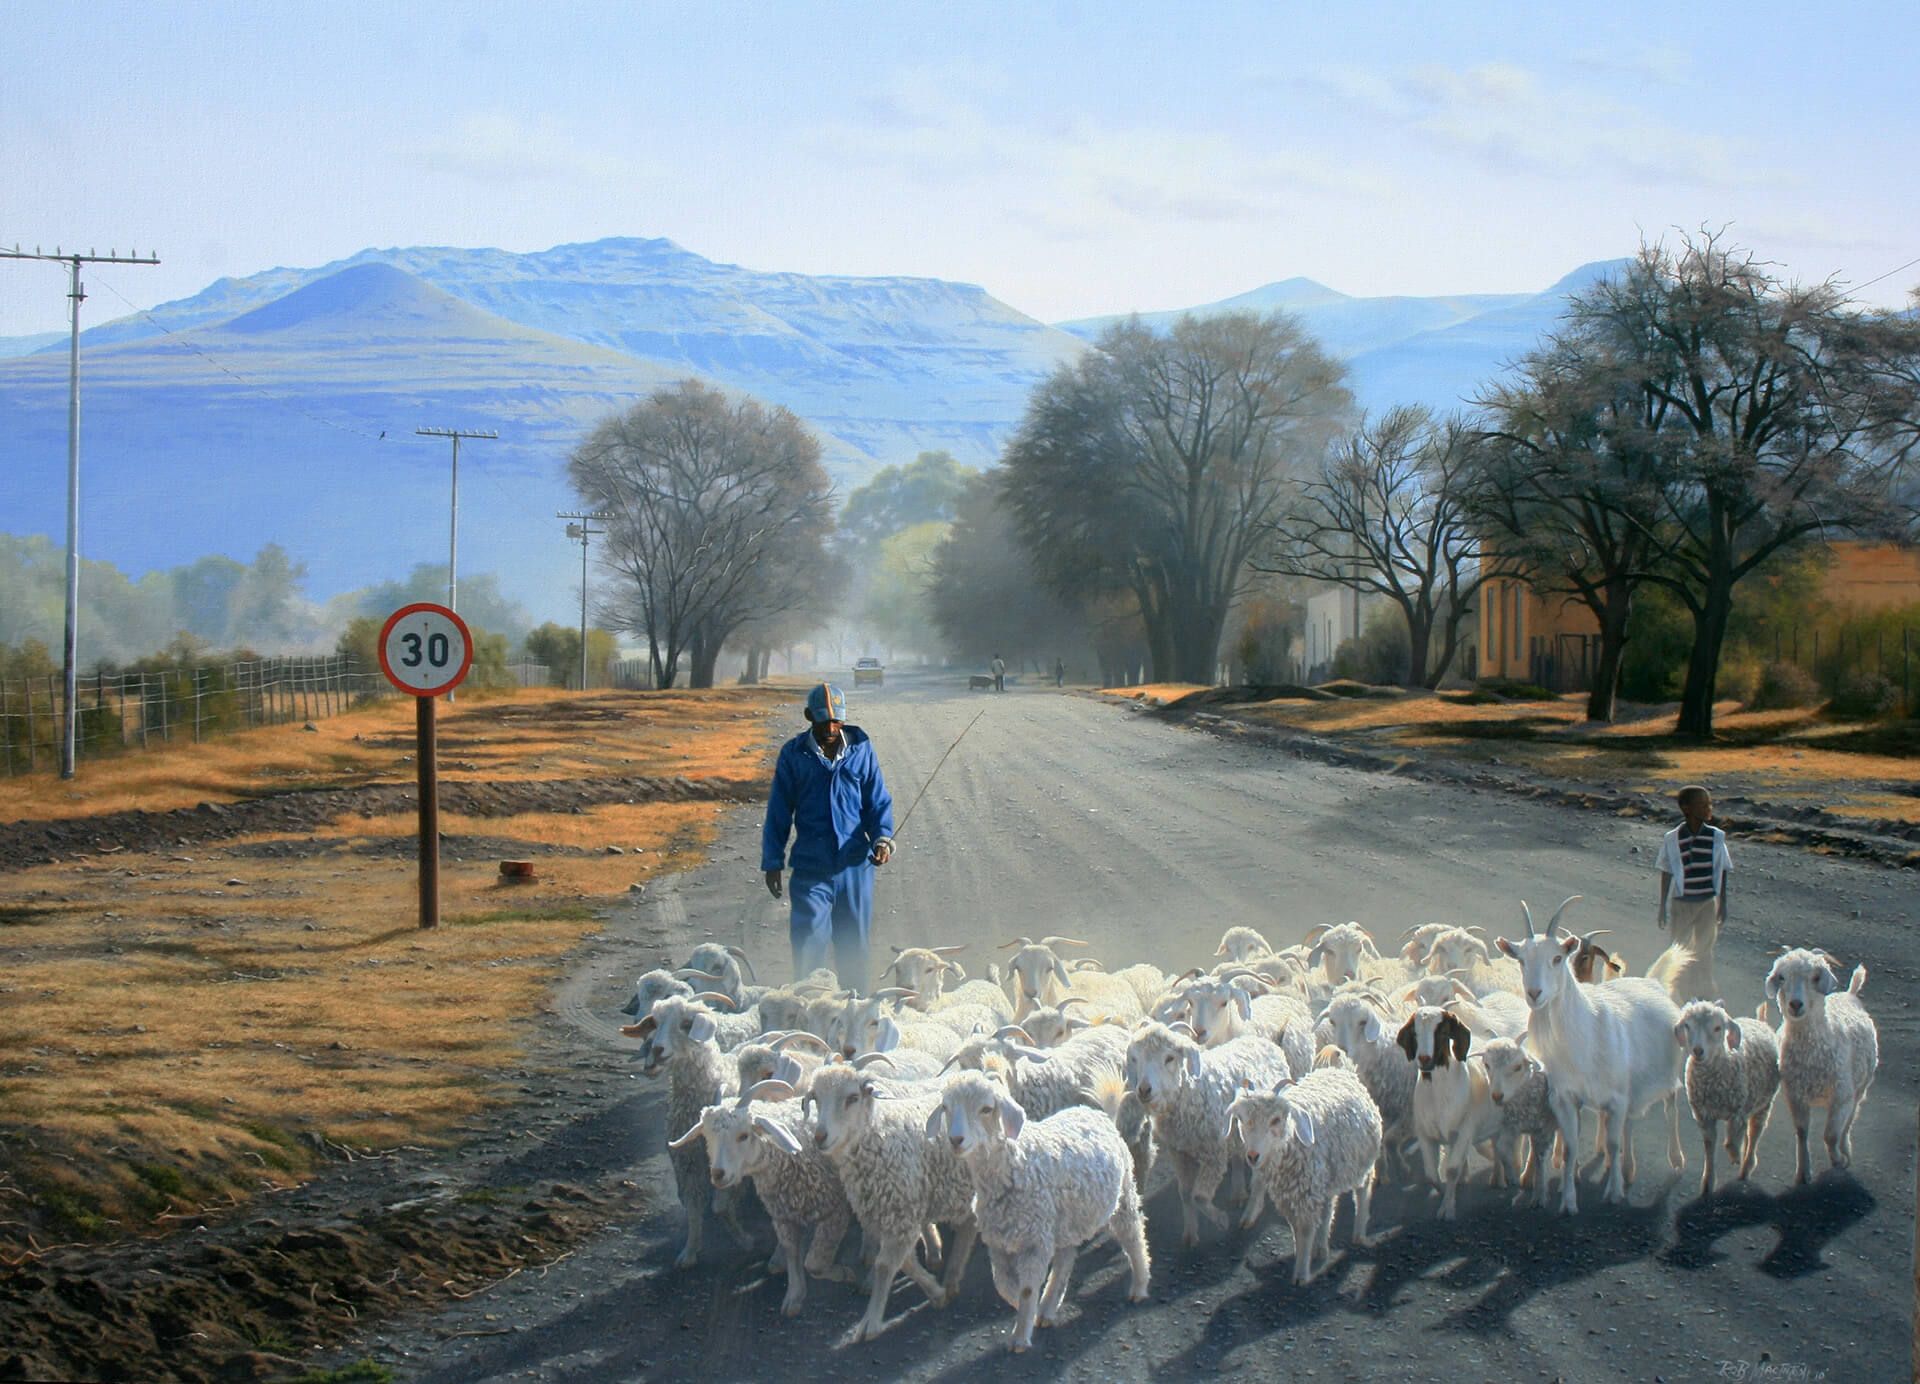 Photorealistic painting of a man herding sheep with a mountain range in the background